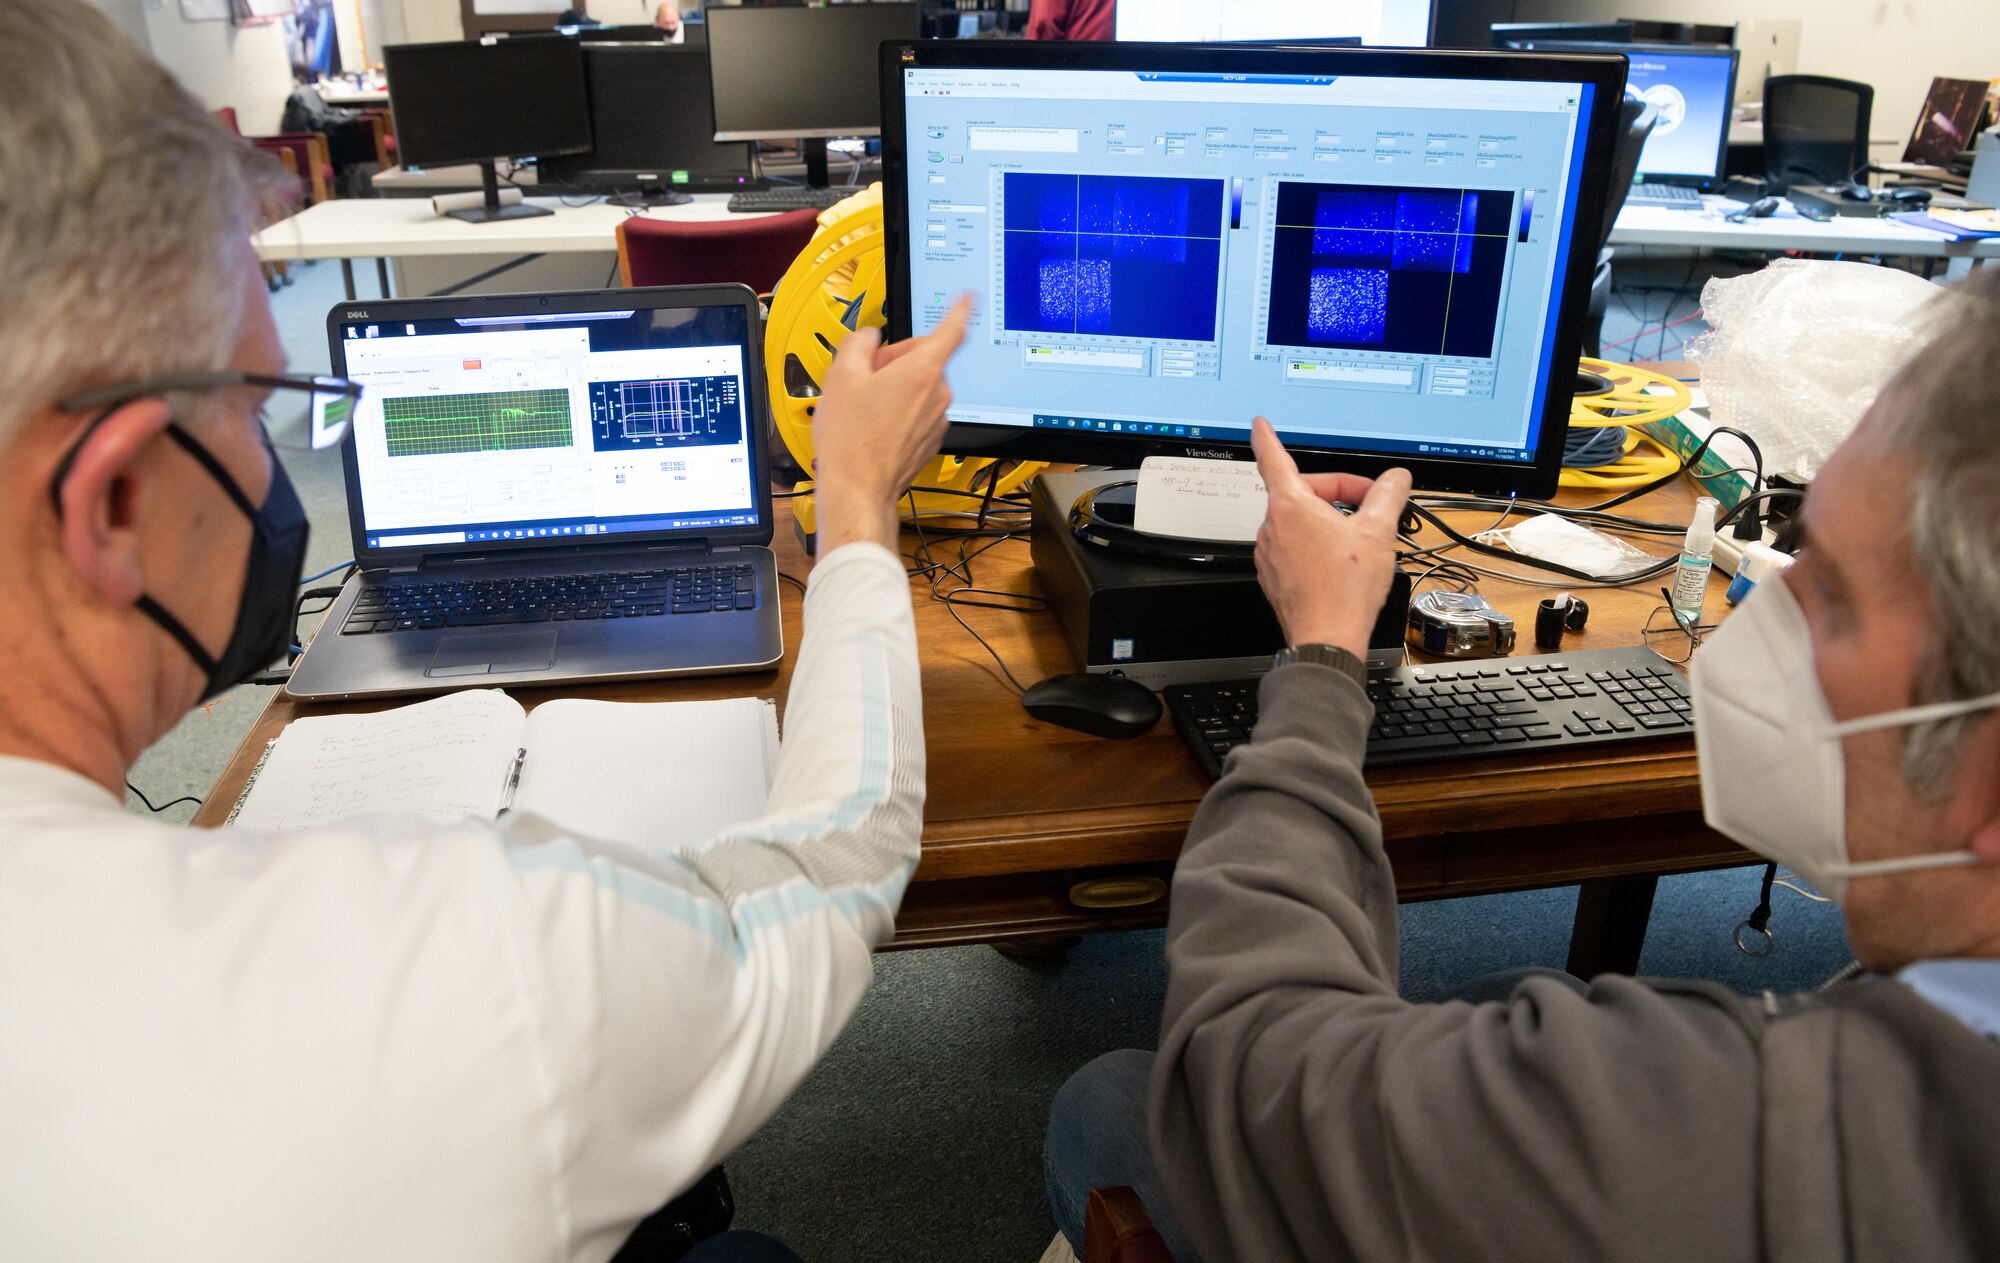 From left, Dr. Tom Jenkins, president of MetroLaser, Inc., and Regis Morgan, senior engineer with MetroLaser, observe the visual display of data during a test of the company's setup to non-invasively measure the unsteady, 3D velocity field of a jet plume from a stationary aircraft engine, Nov. 18, 2021, at the Propulsion Research Facility.